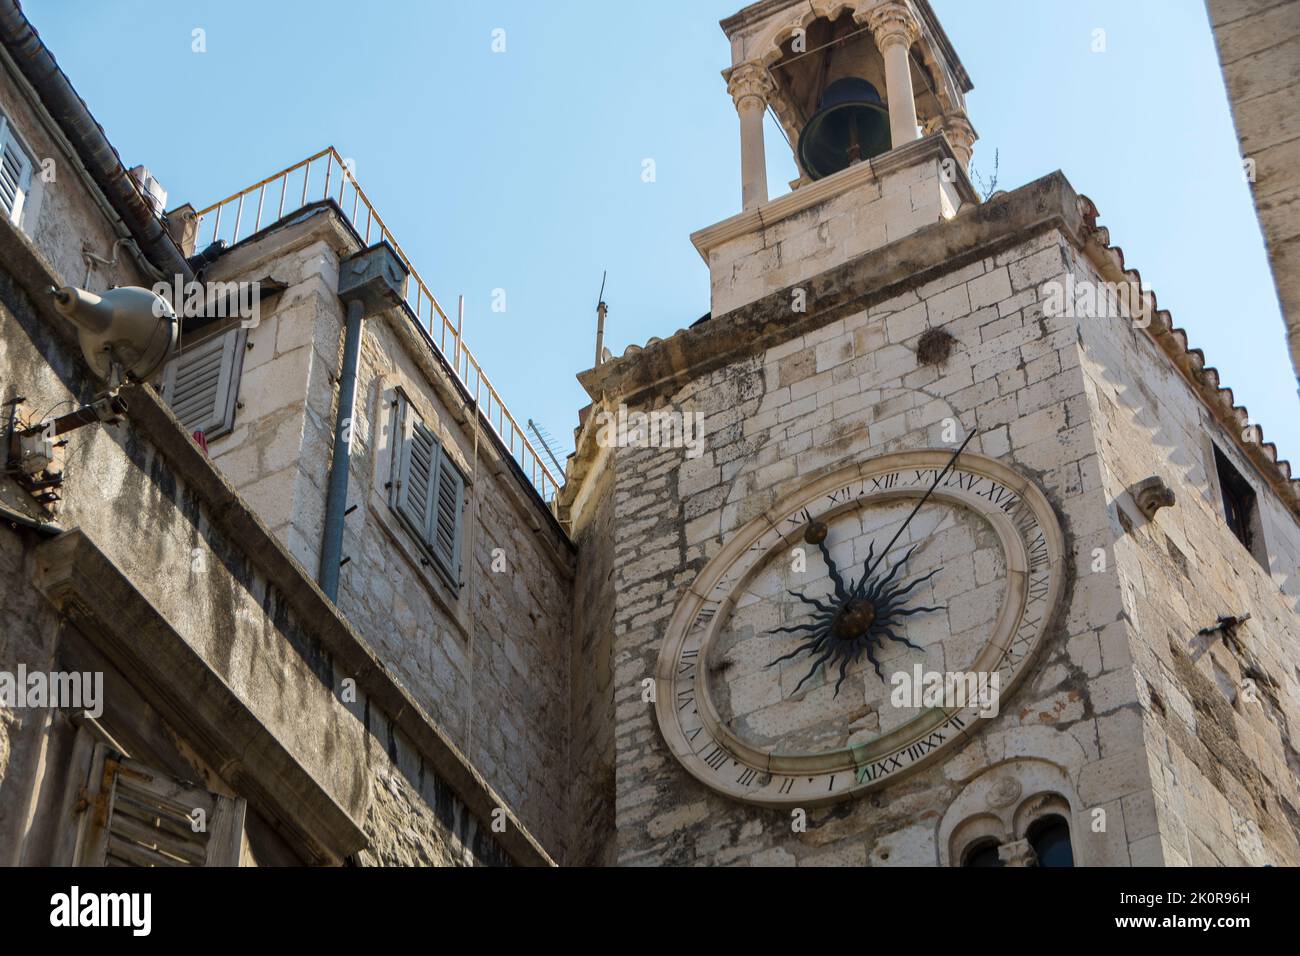 Belltower of the Church of Our Lady of Zvonik,Split, Croatia. Built into a small space within the ancient Iron Gate of Diocletian's western wall. Stock Photo